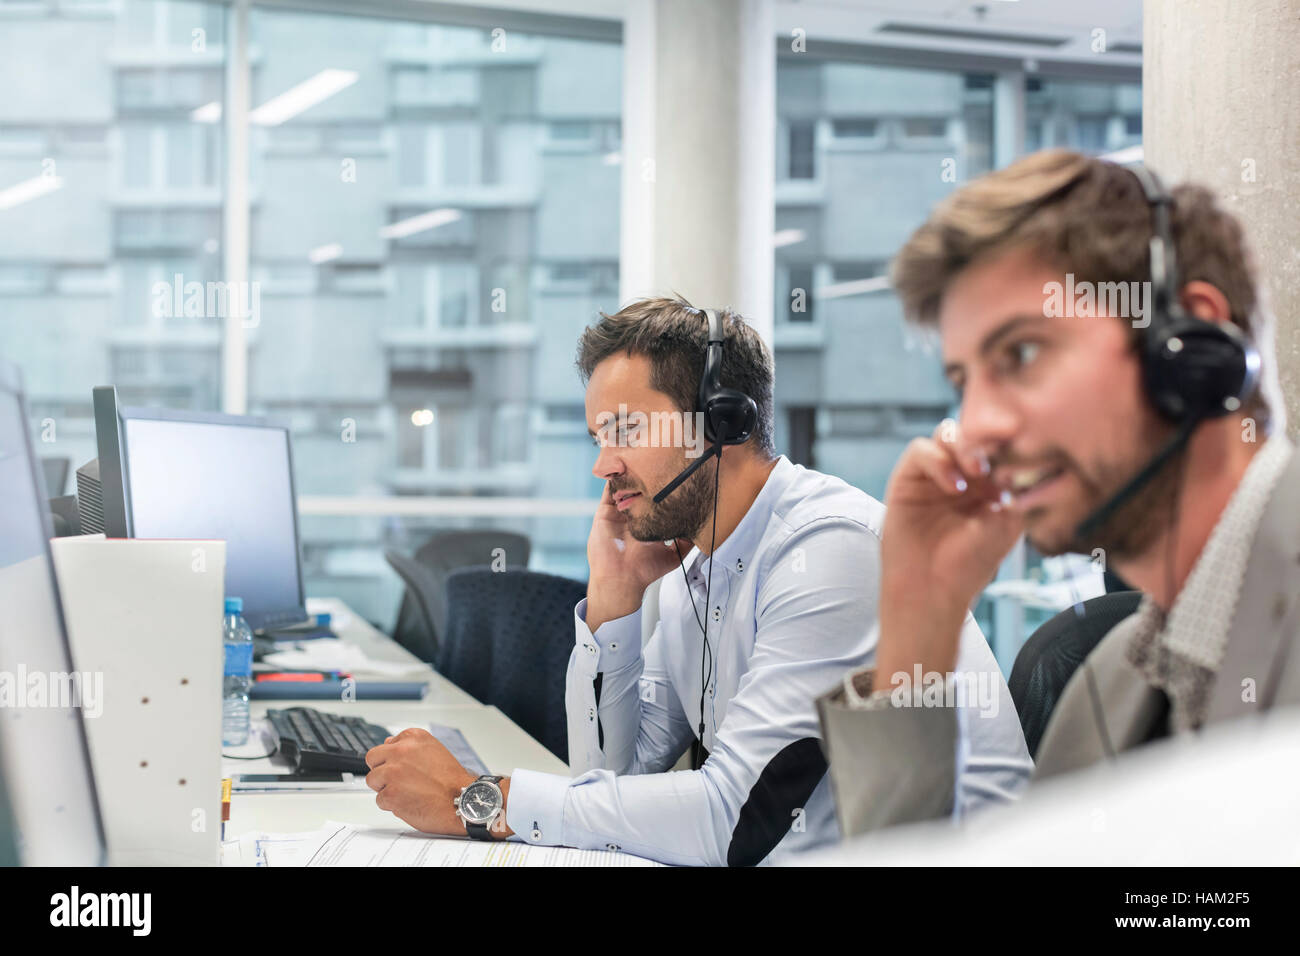 Businessmen with hands-free devices talking on telephone working at computers in office Stock Photo